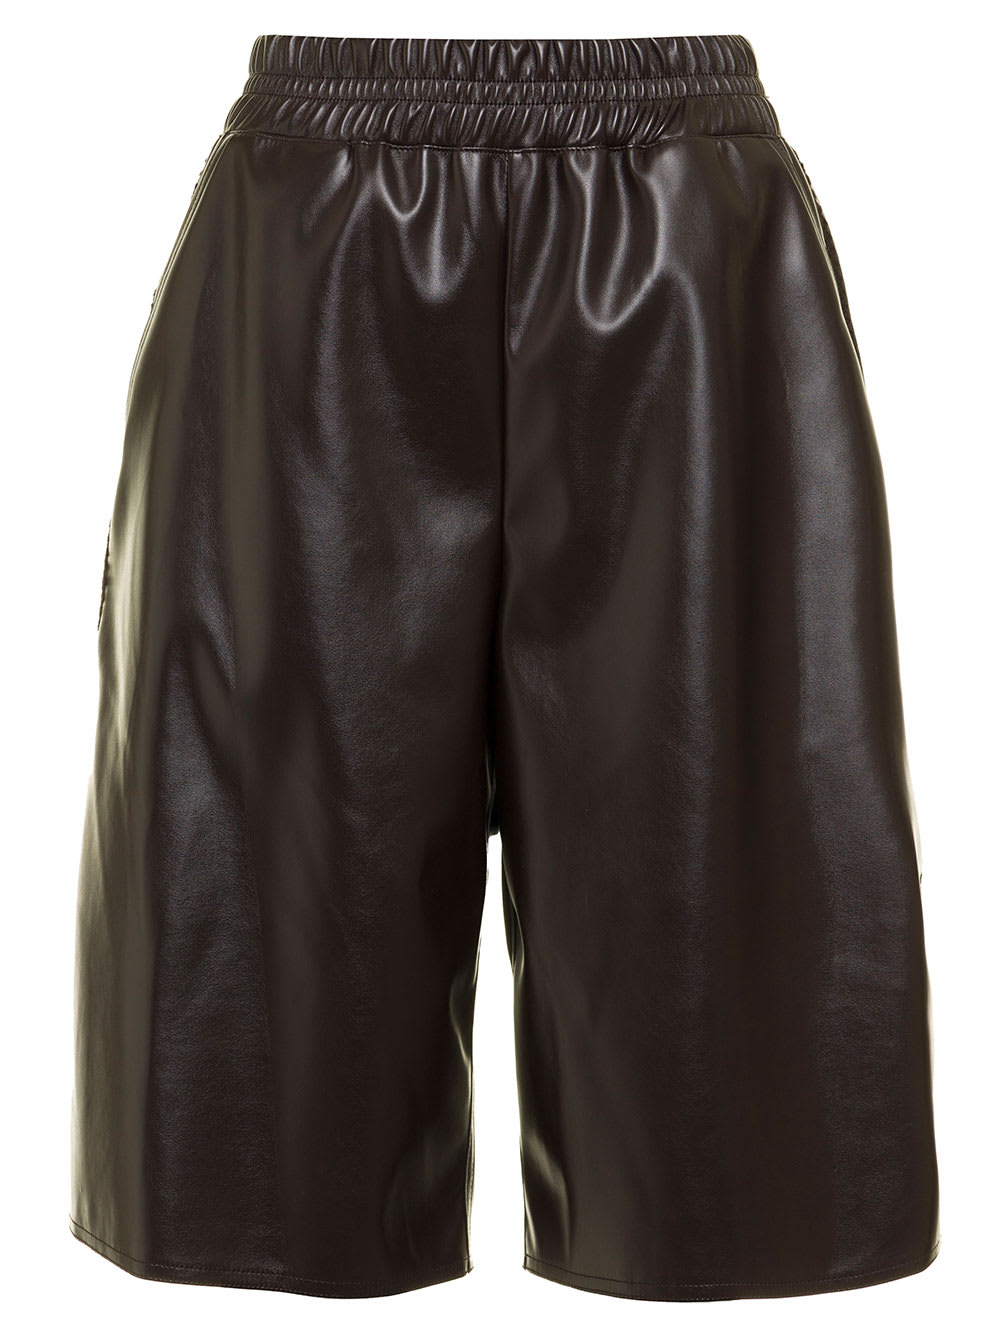 Low Classic Womans Brown Leatheret Bermuda Shorts